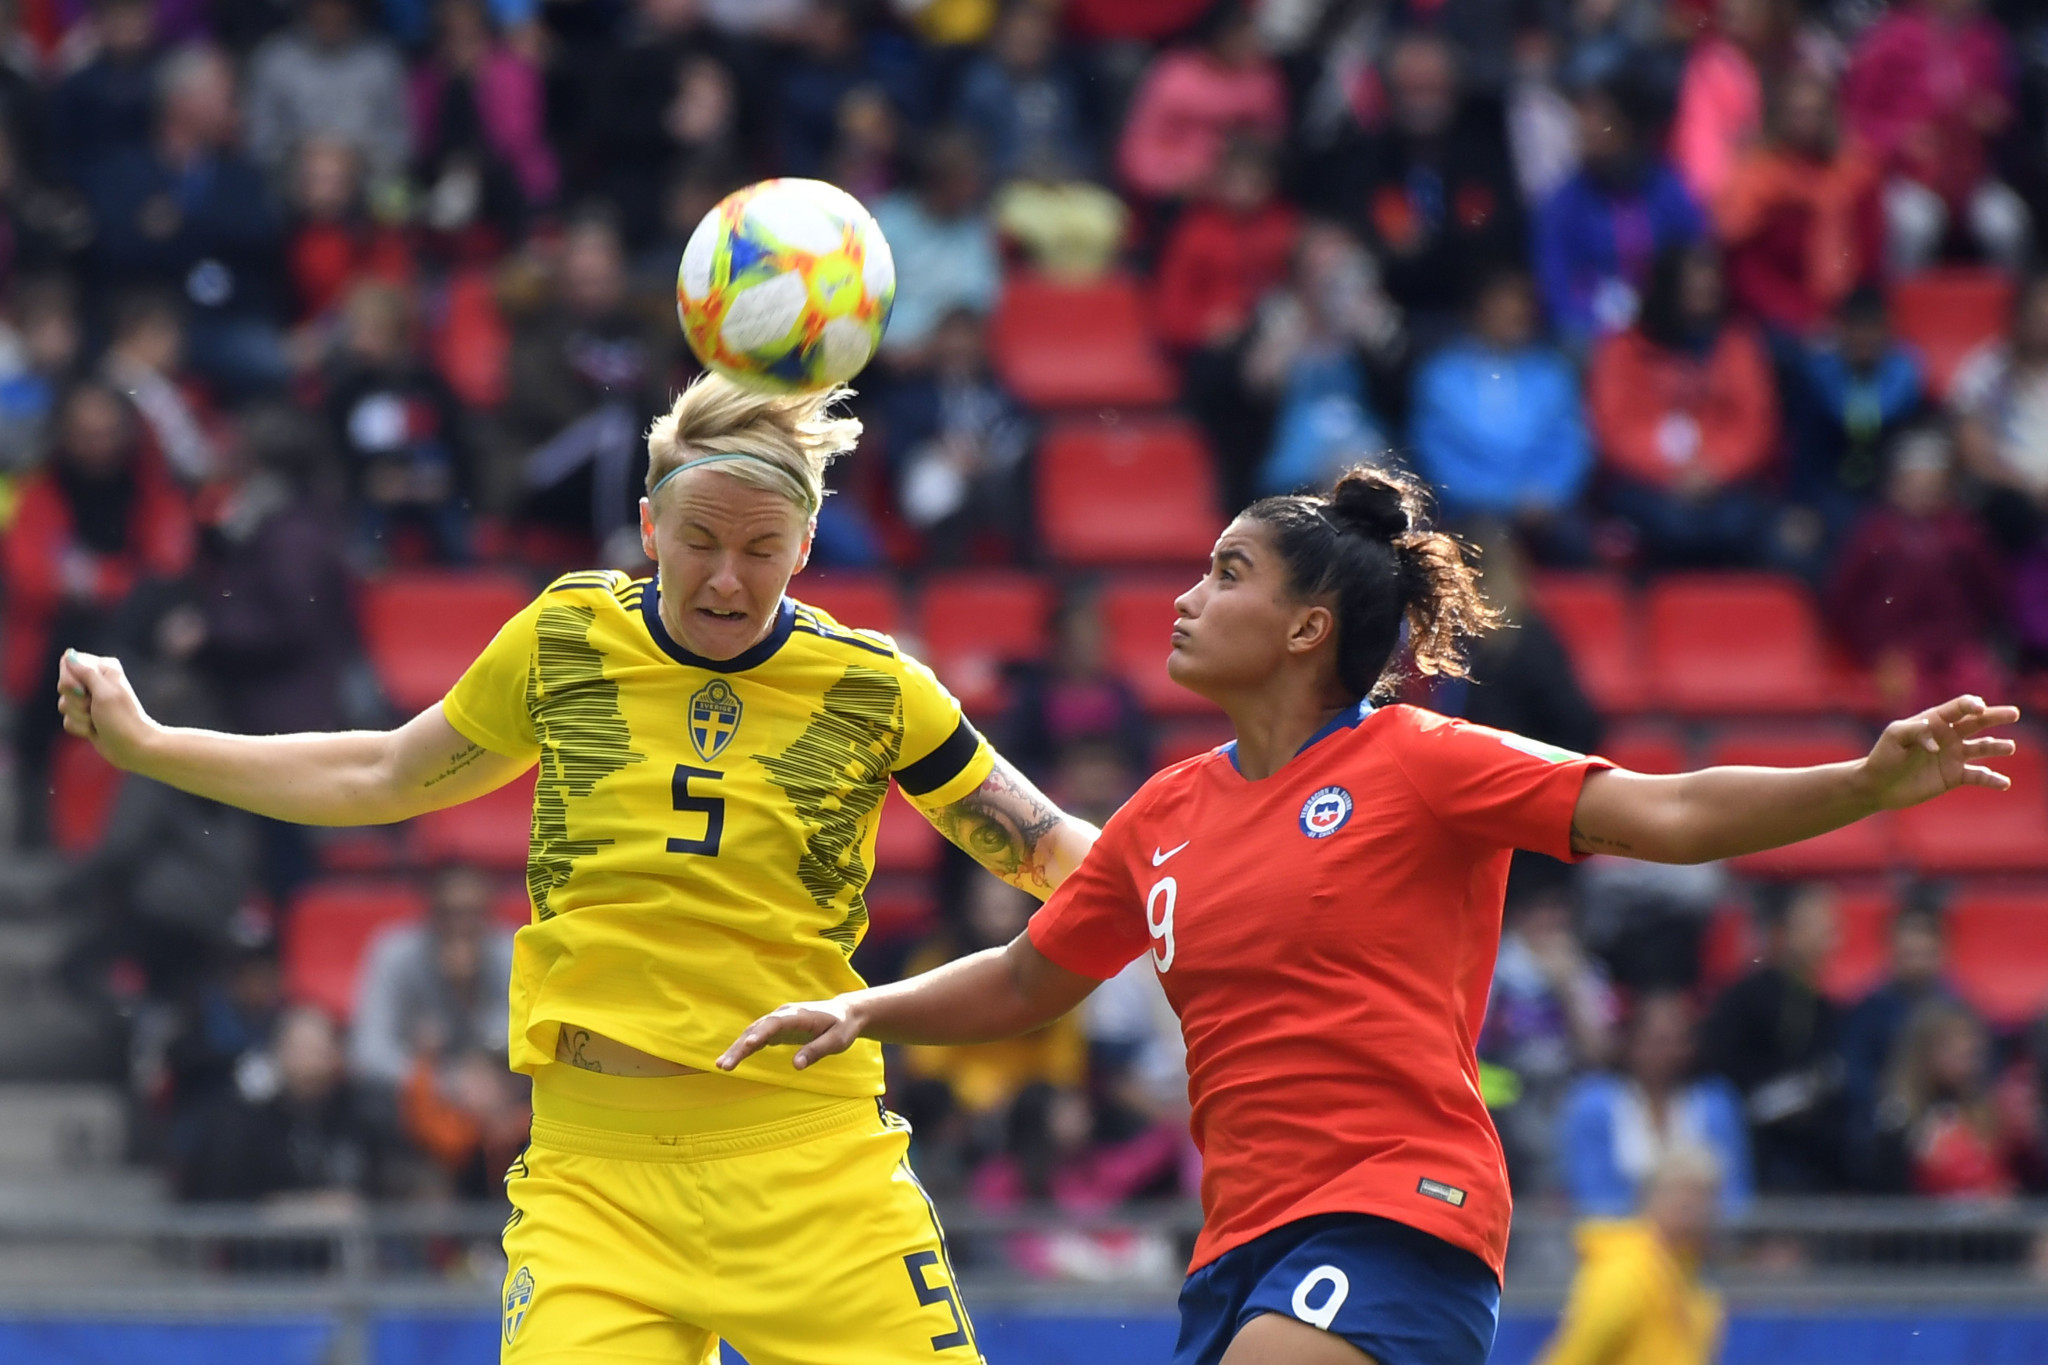 Nilla Fischer is representing Sweden at the 2019 FIFA Women's World Cup in France ©Getty Images